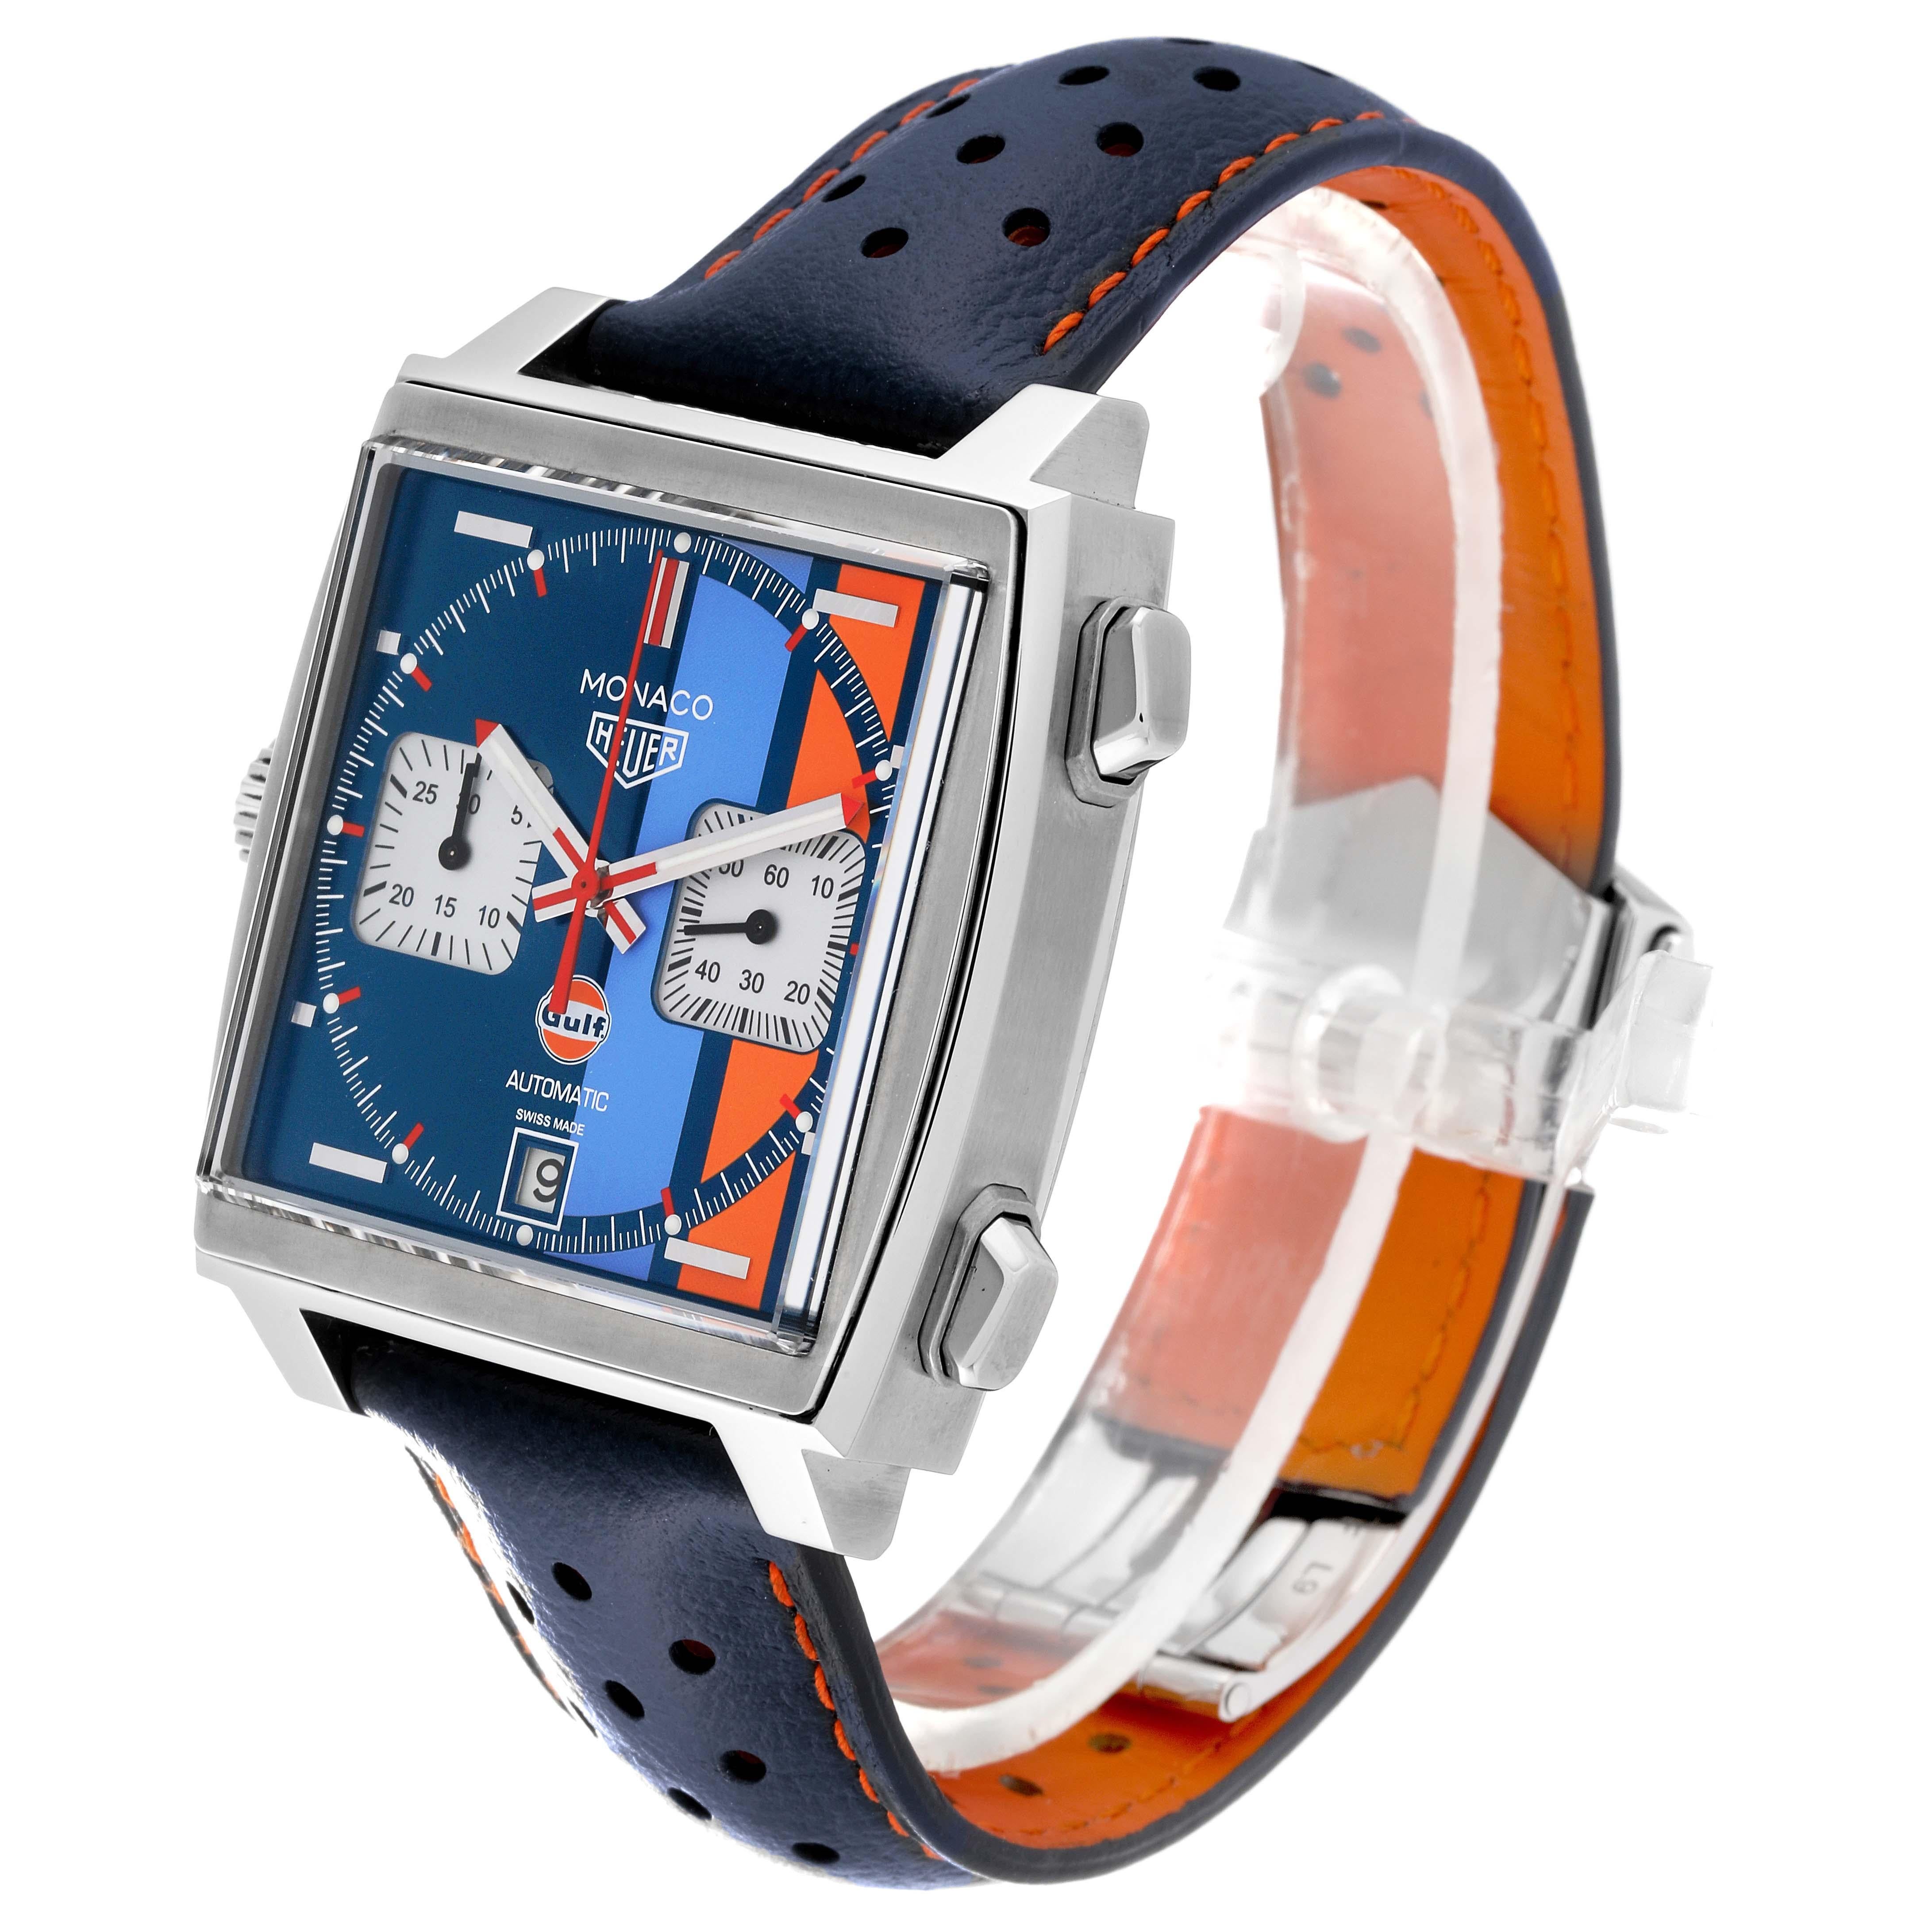 Tag Heuer Monaco Gulf 2018 Chronograph Steel Mens Watch CAW211R Box Card In Excellent Condition For Sale In Atlanta, GA